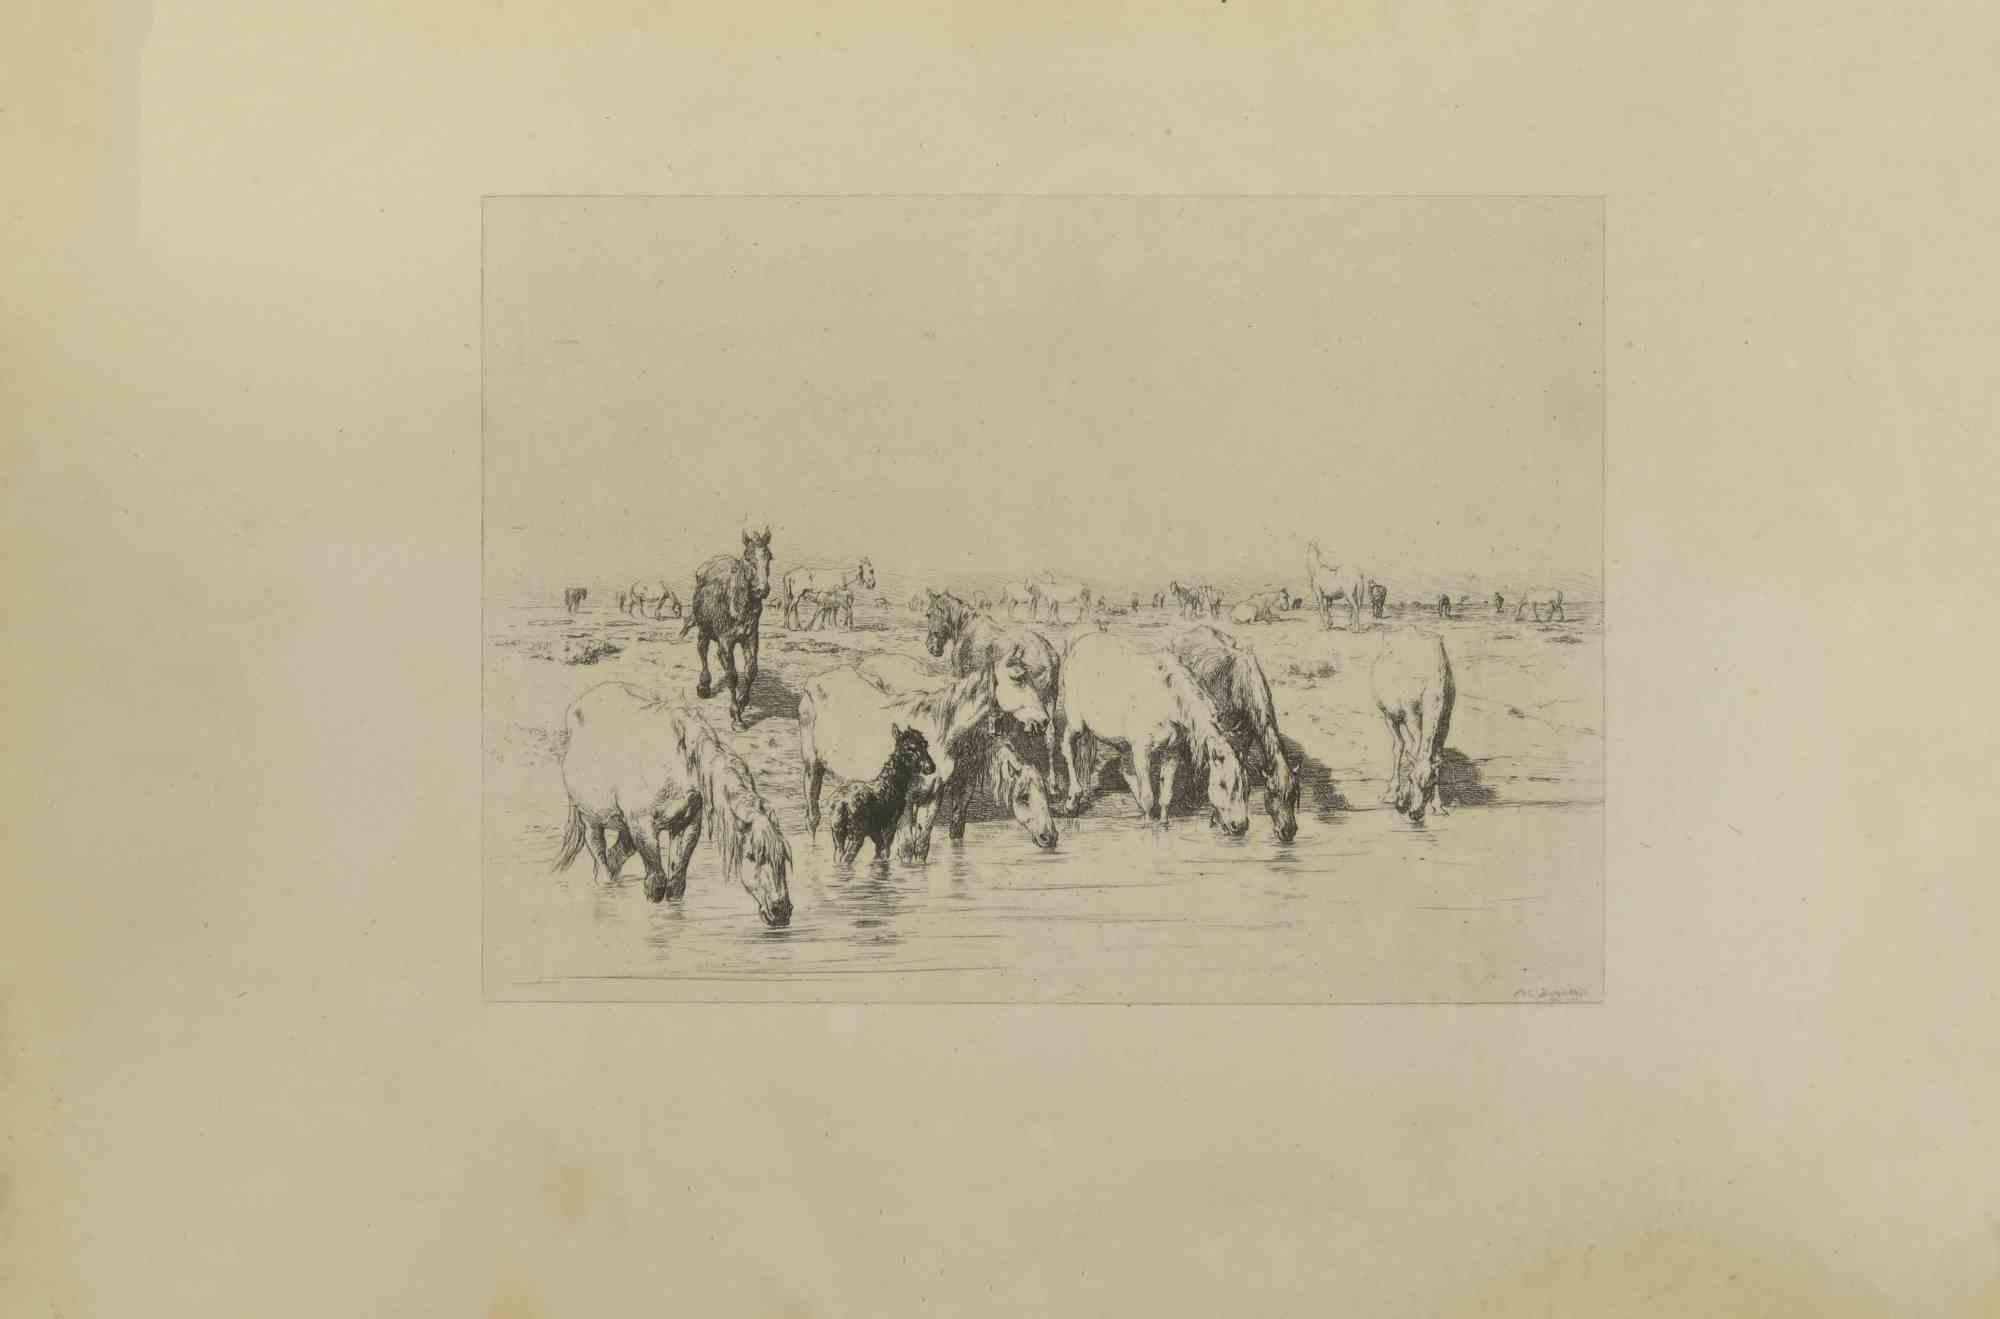 Herd of Horses - Etching by Eugène Burnand - Late 19th century